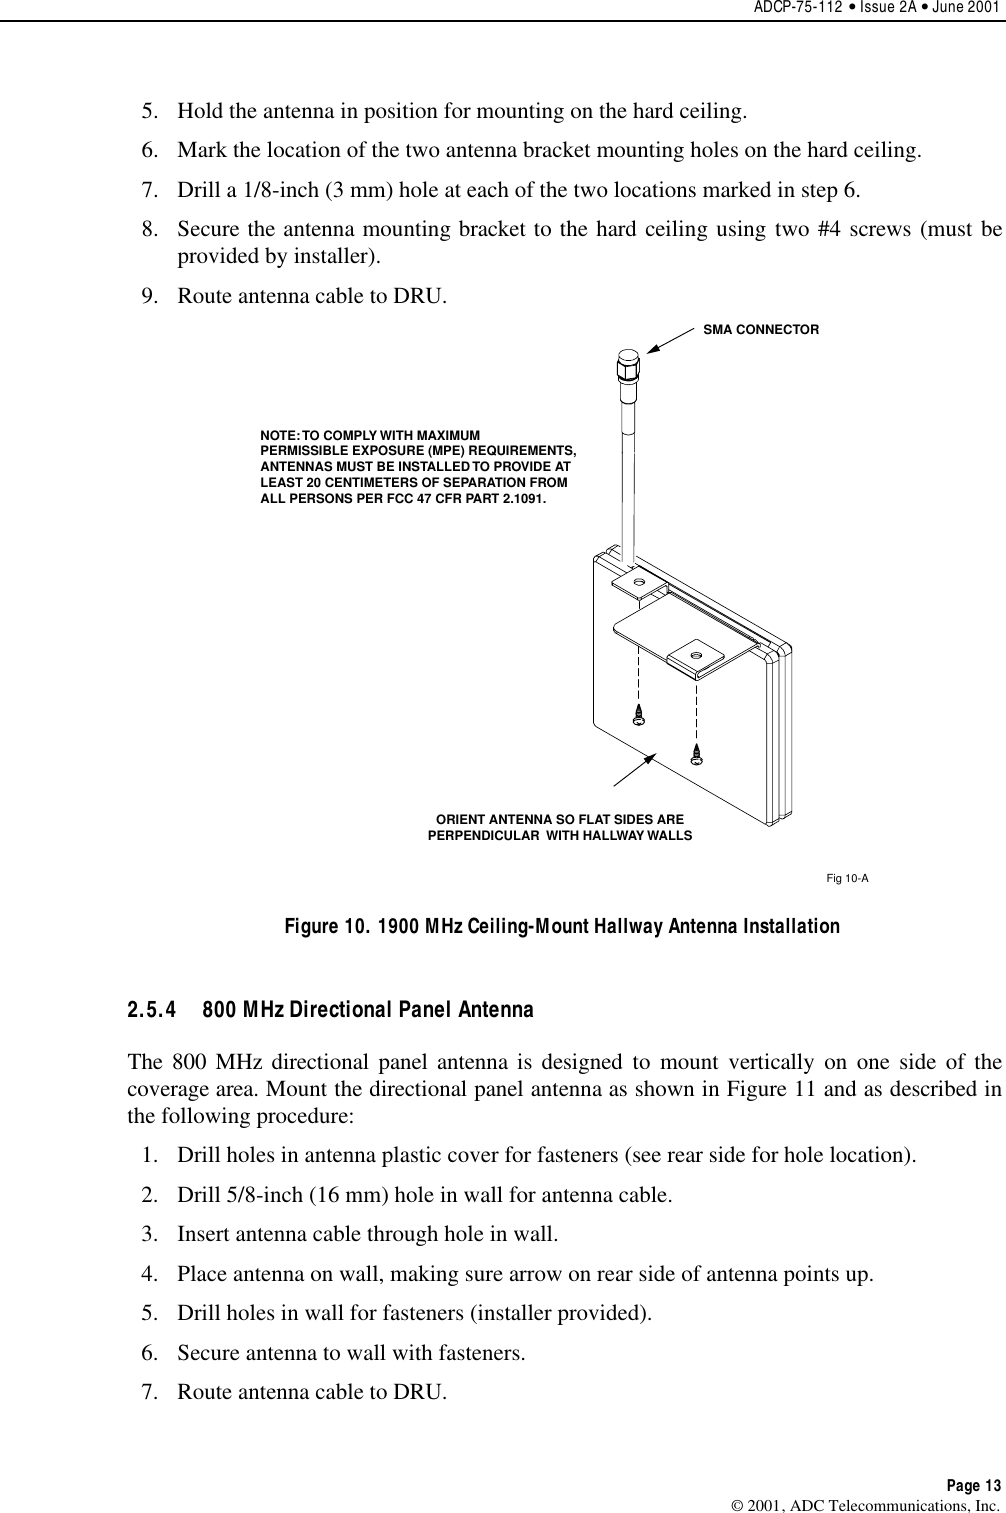 ADCP-75-112 • Issue 2A • June 2001Page 13© 2001, ADC Telecommunications, Inc.5. Hold the antenna in position for mounting on the hard ceiling.6. Mark the location of the two antenna bracket mounting holes on the hard ceiling.7. Drill a 1/8-inch (3 mm) hole at each of the two locations marked in step 6.8. Secure the antenna mounting bracket to the hard ceiling using two #4 screws (must beprovided by installer).9. Route antenna cable to DRU.Fig 10-ASMA CONNECTORORIENT ANTENNA SO FLAT SIDES AREPERPENDICULAR  WITH HALLWAY WALLSNOTE: TO COMPLY WITH MAXIMUMPERMISSIBLE EXPOSURE (MPE) REQUIREMENTS,ANTENNAS MUST BE INSTALLED TO PROVIDE ATLEAST 20 CENTIMETERS OF SEPARATION FROMALL PERSONS PER FCC 47 CFR PART 2.1091. Figure 10. 1900 MHz Ceiling-Mount Hallway Antenna Installation2.5.4  800 MHz Directional Panel AntennaThe 800 MHz directional panel antenna is designed to mount vertically on one side of thecoverage area. Mount the directional panel antenna as shown in Figure 11 and as described inthe following procedure:1. Drill holes in antenna plastic cover for fasteners (see rear side for hole location).2. Drill 5/8-inch (16 mm) hole in wall for antenna cable.3. Insert antenna cable through hole in wall.4. Place antenna on wall, making sure arrow on rear side of antenna points up.5. Drill holes in wall for fasteners (installer provided).6. Secure antenna to wall with fasteners.7. Route antenna cable to DRU.